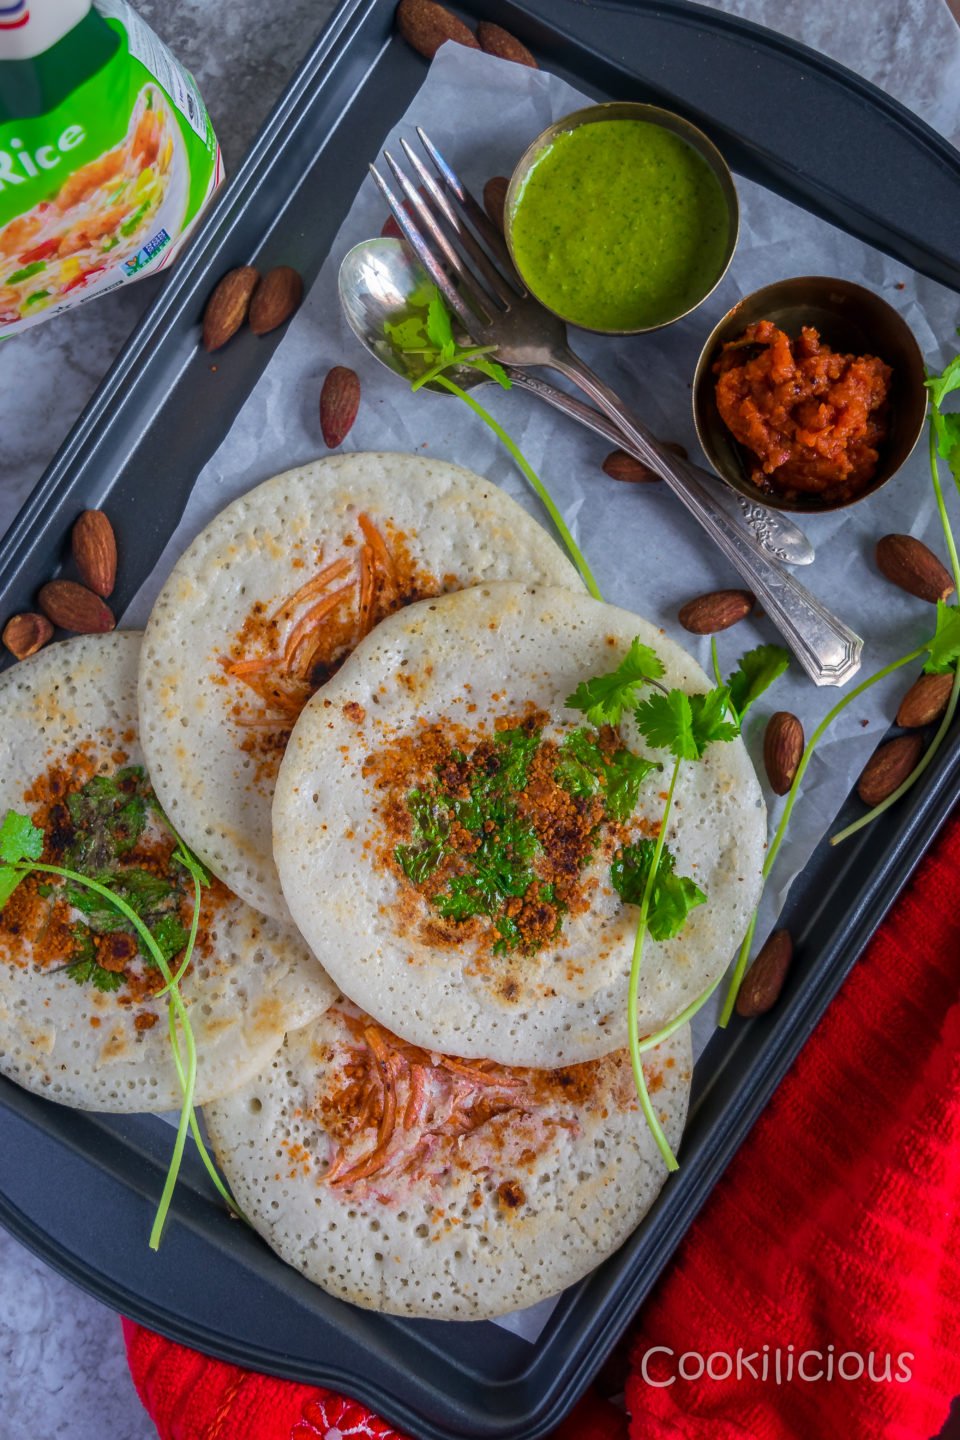 top image of a tray full of uttapam made from dosa batter served with 2 kinds of chutney